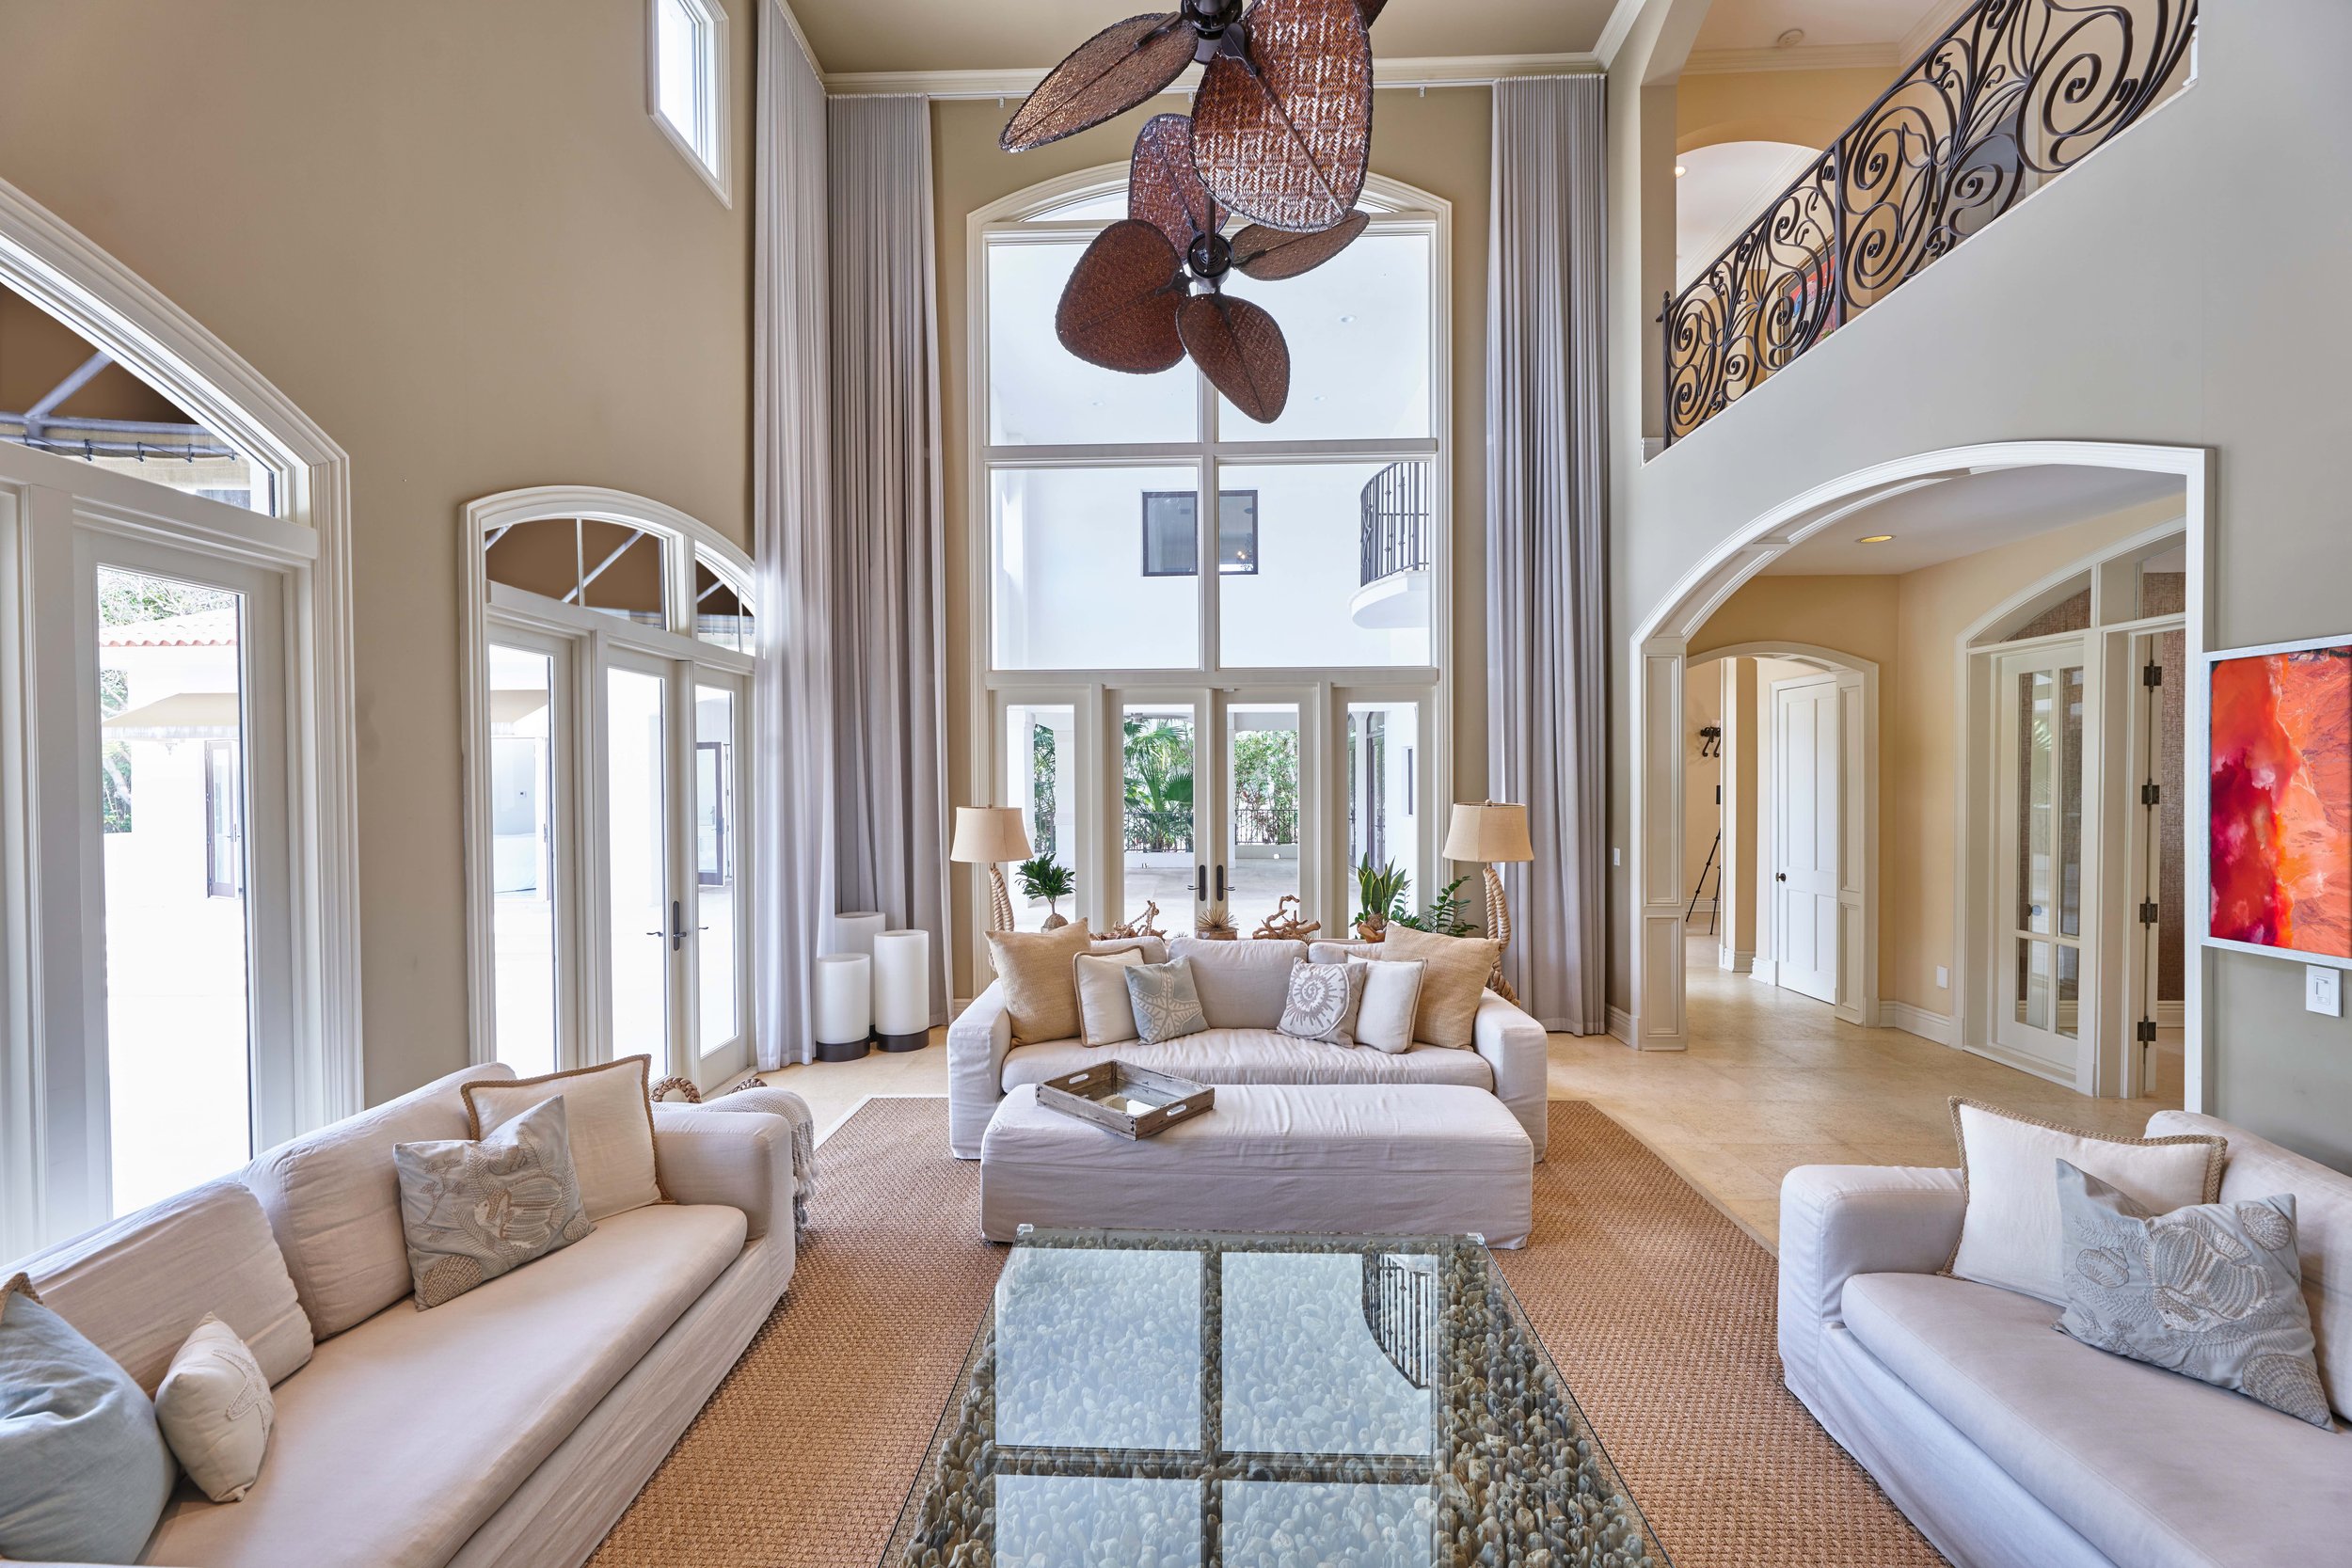 Step Inside This Coral Gables Mansion In The Exclusive Tahiti Beach Asking $12.9 Million 13.jpg